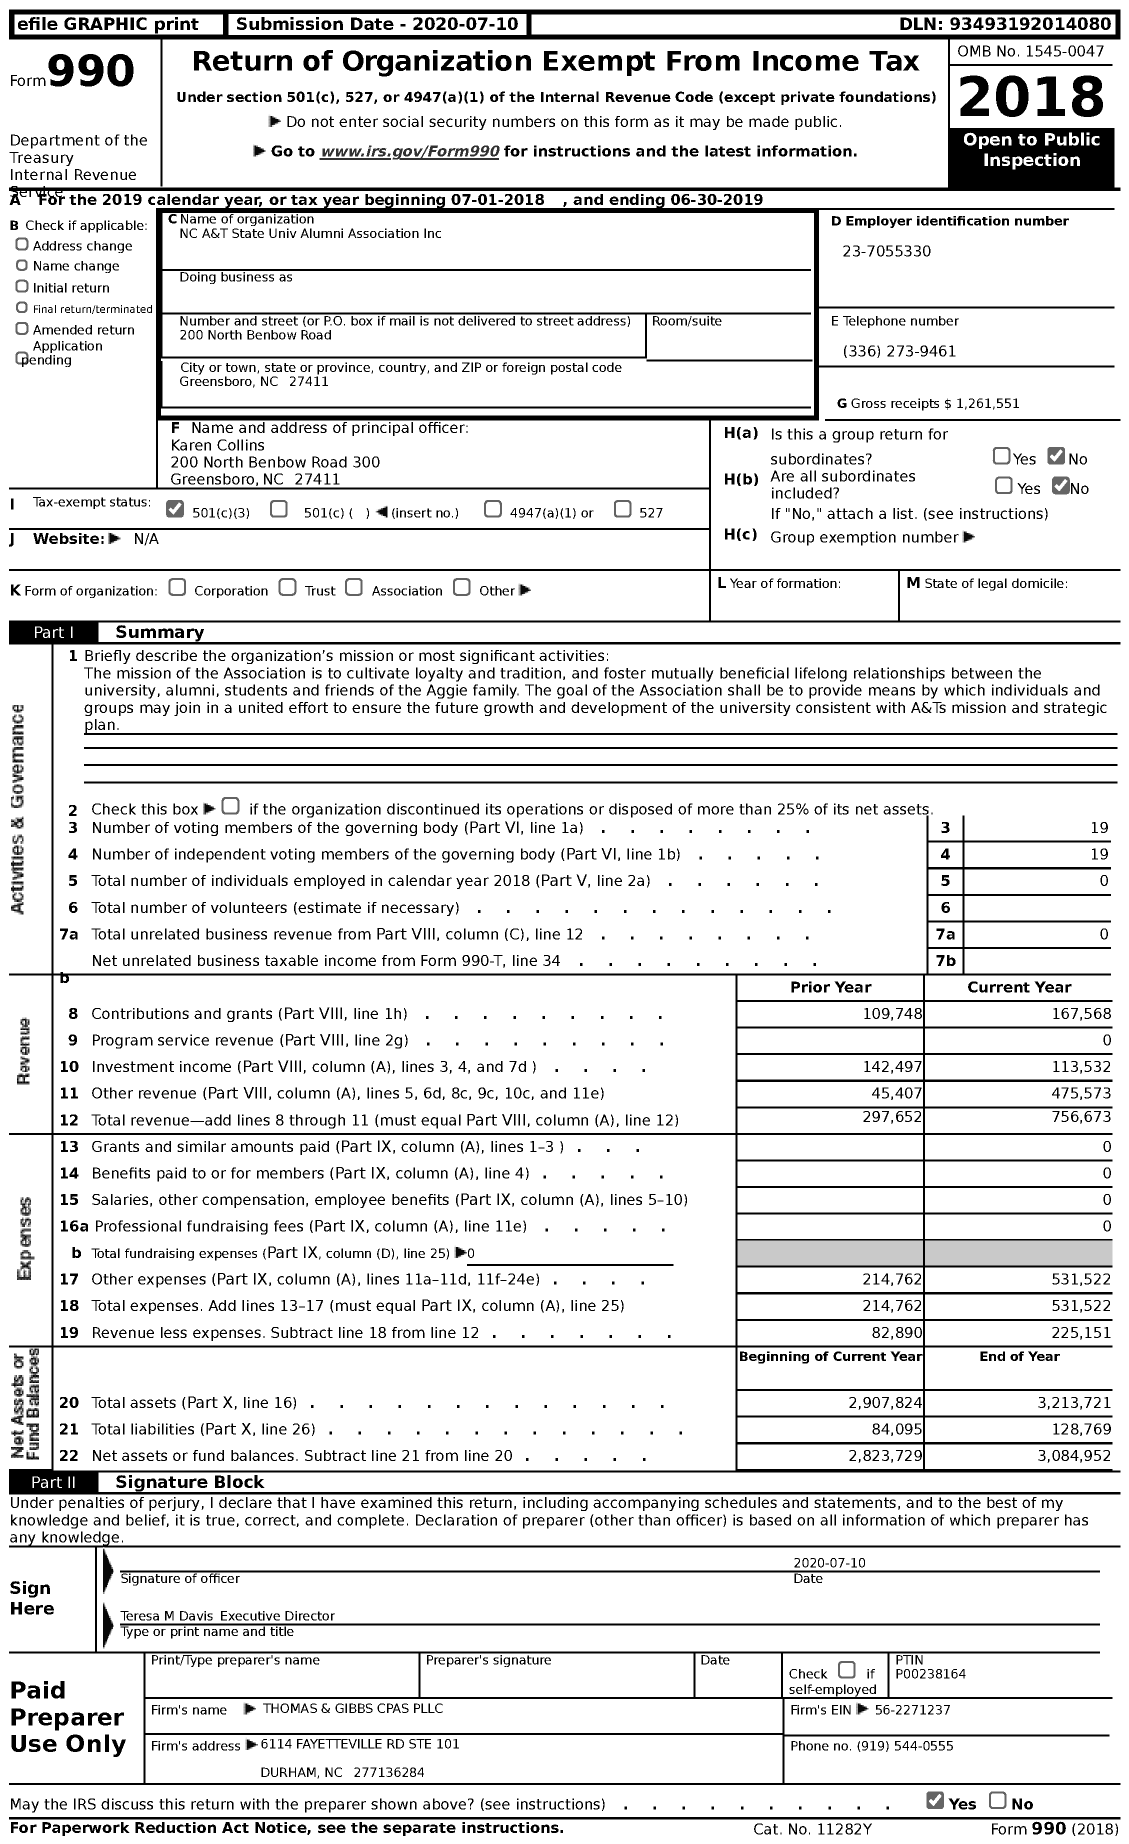 Image of first page of 2018 Form 990 for The Foundation for NC A&T State University